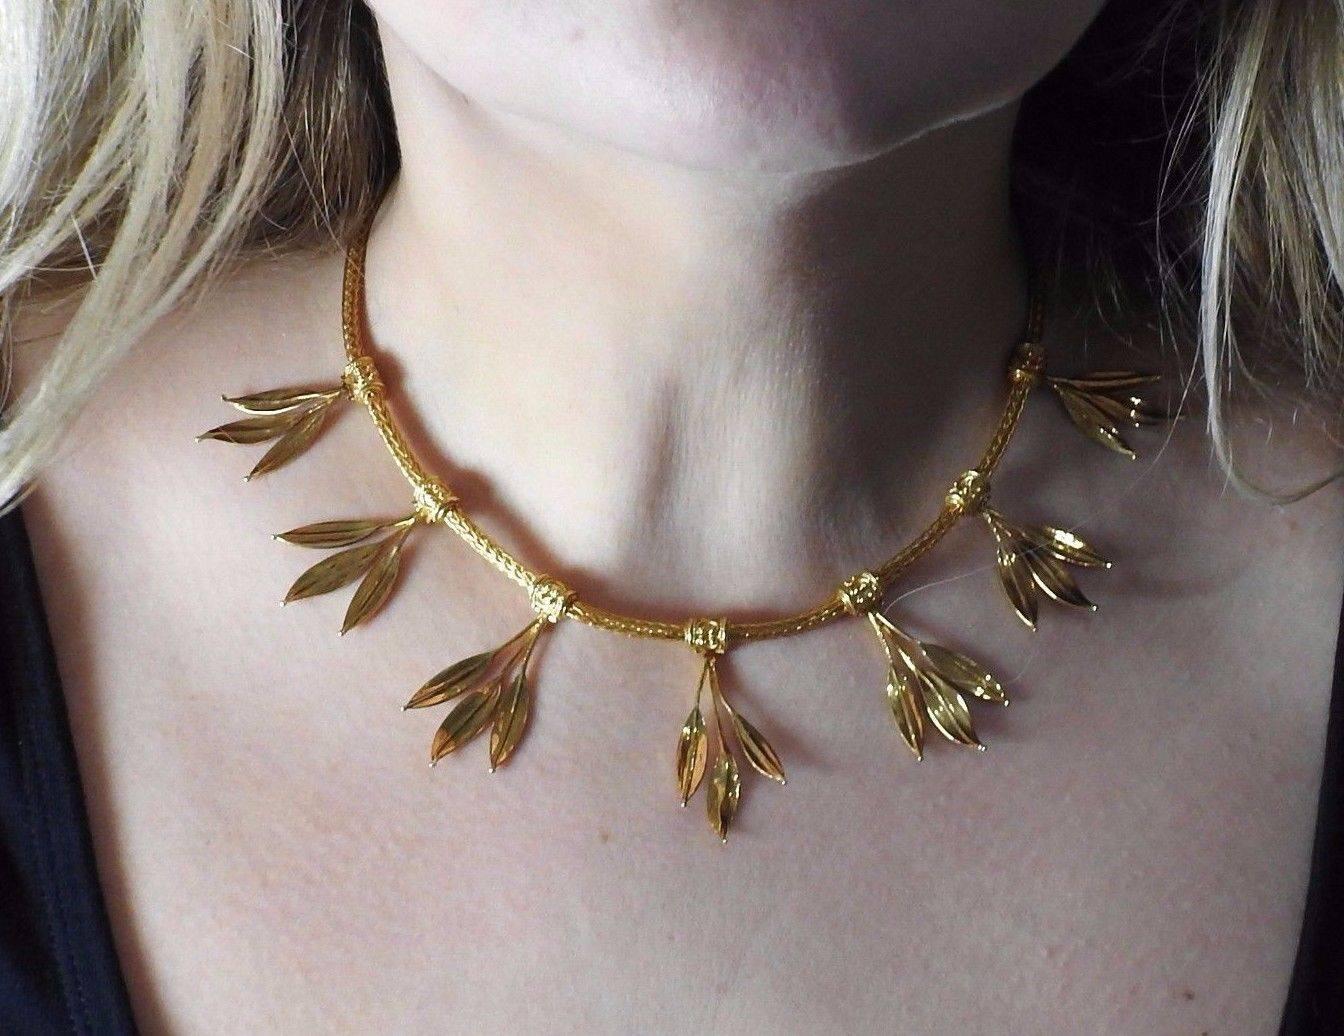 An 18K yellow gold necklace with leaf motif stations.  The necklace is 16